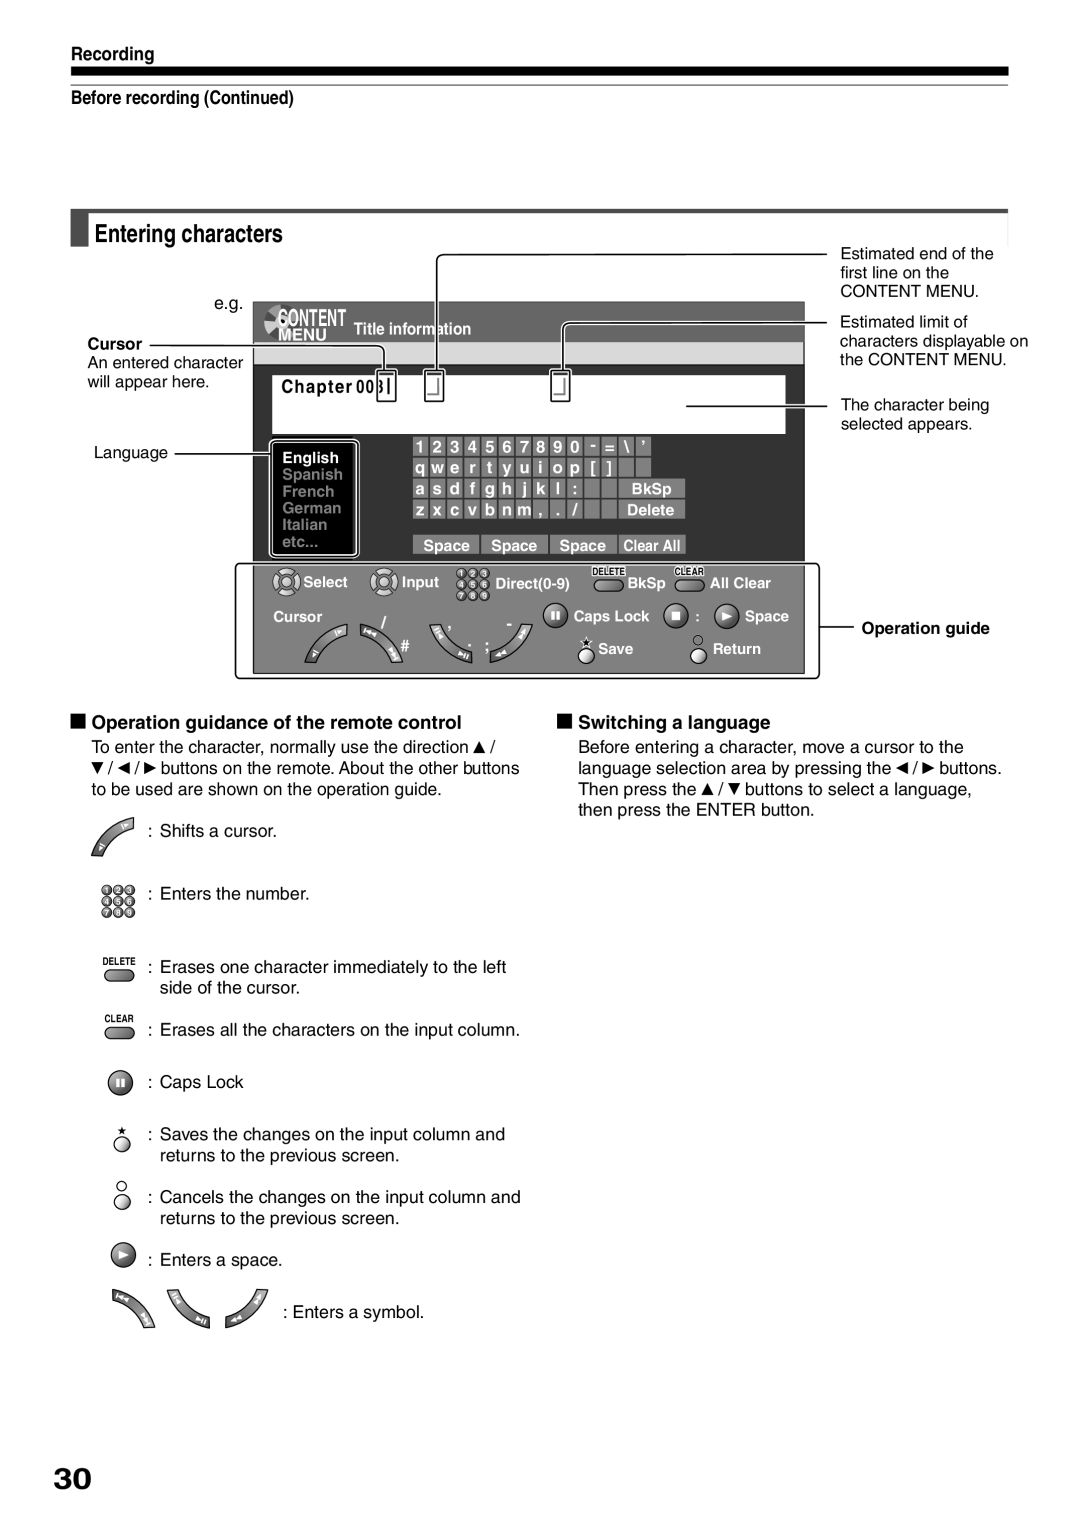 Toshiba D-R2SU Entering characters, Operation guidance of the remote control, Switching a language, Operation guide 